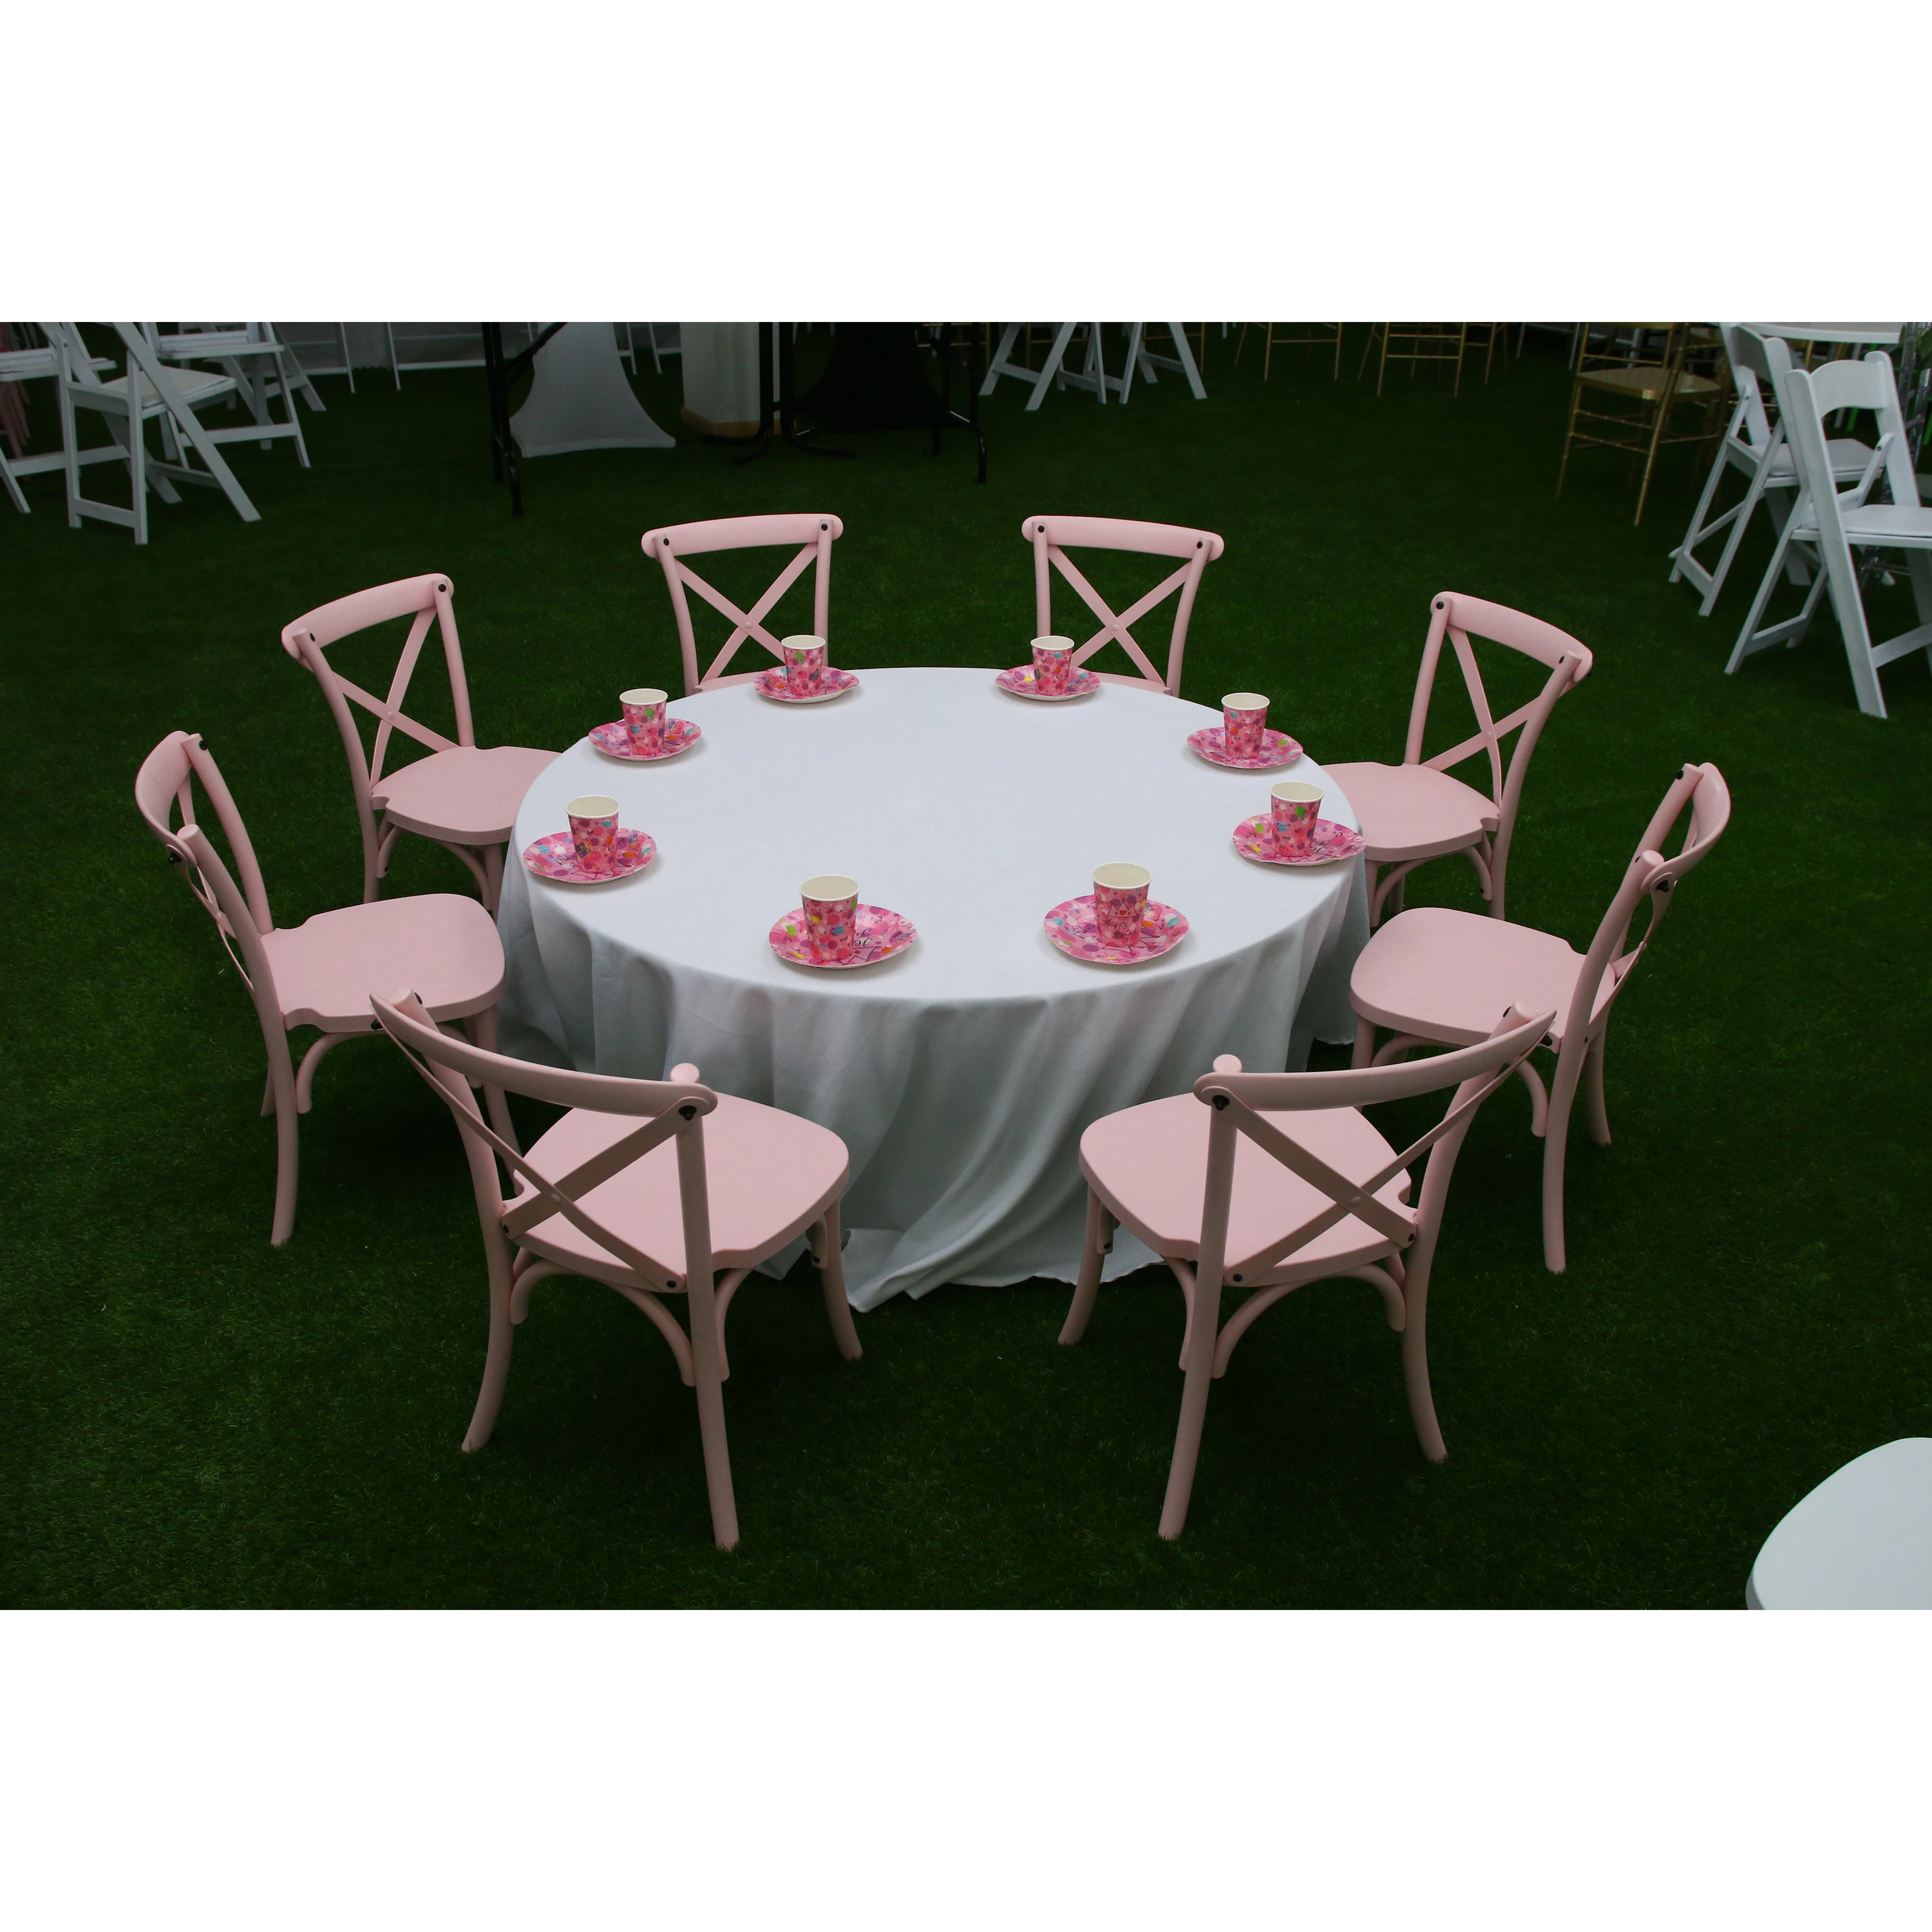 Children Table Chair For Children Party Wholesale Price Buy